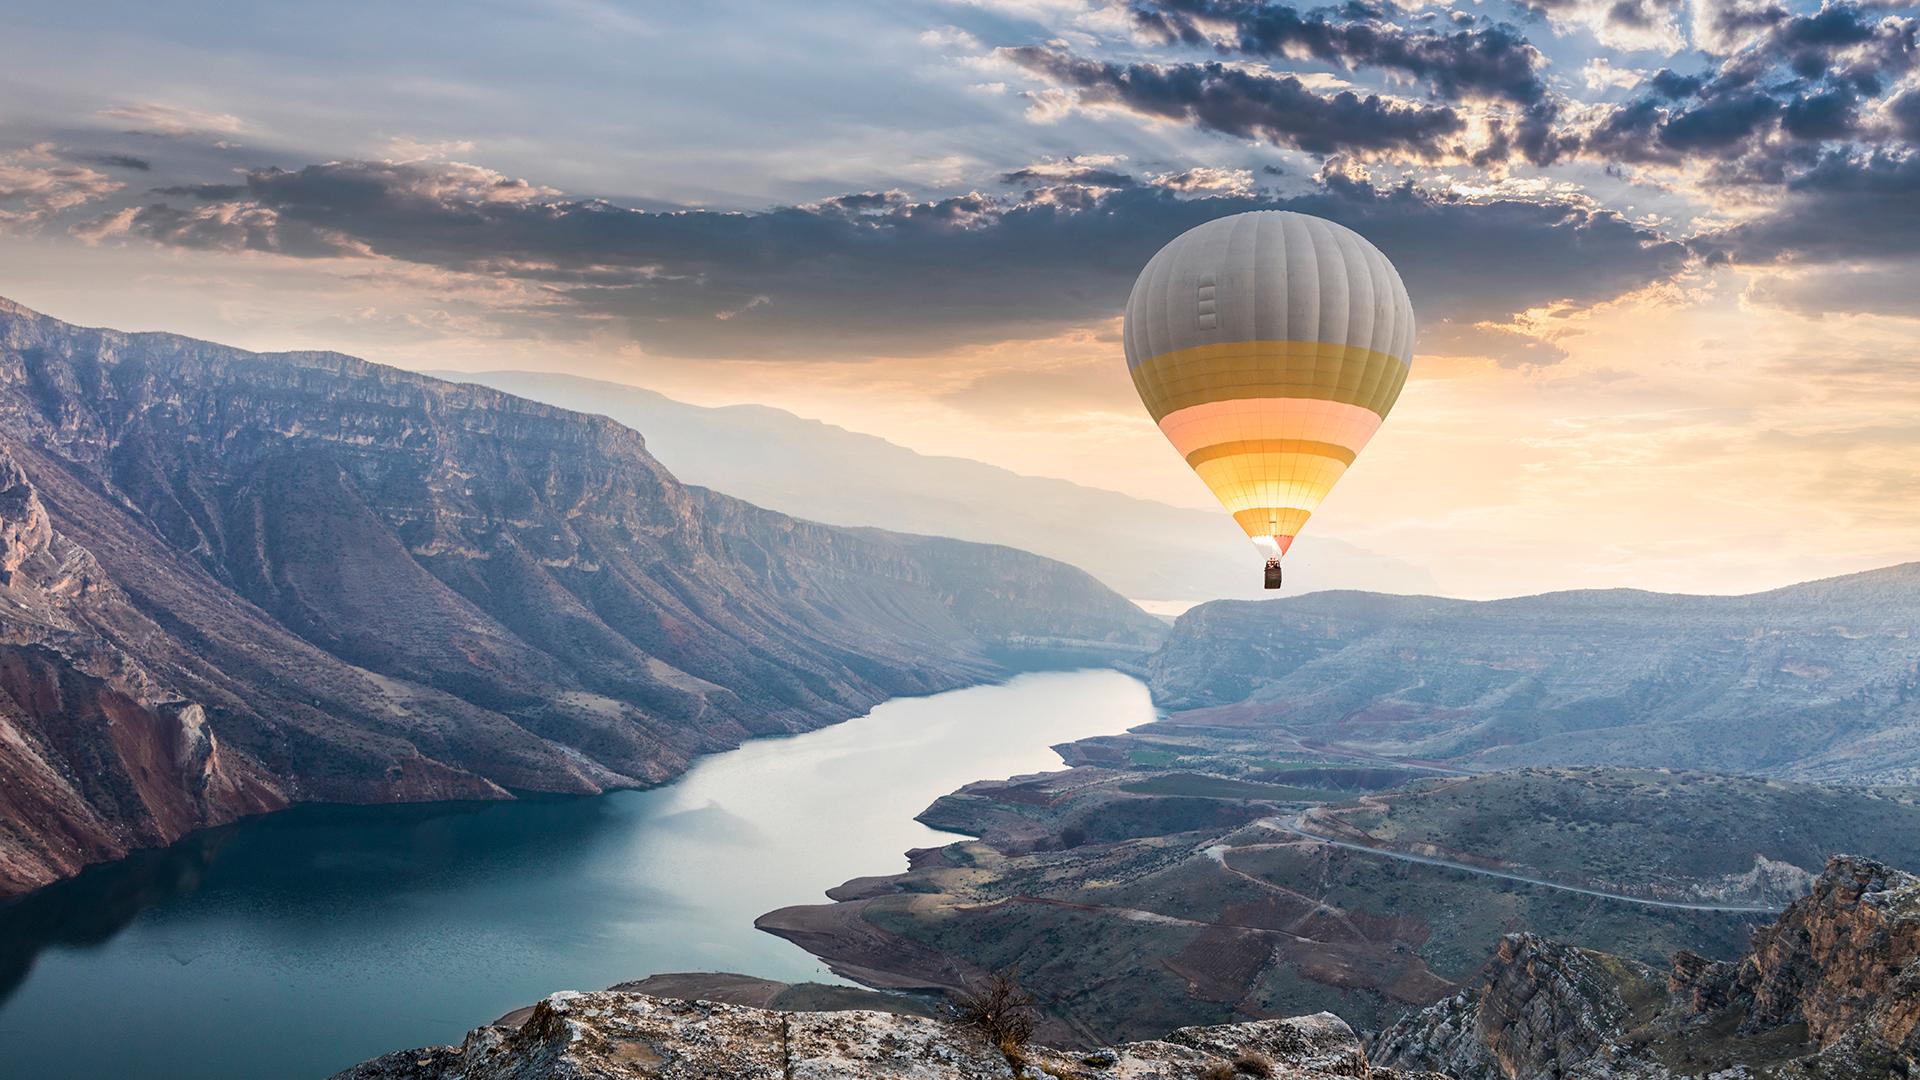 Hot air balloons flying over the Botan Canyon in Turkey